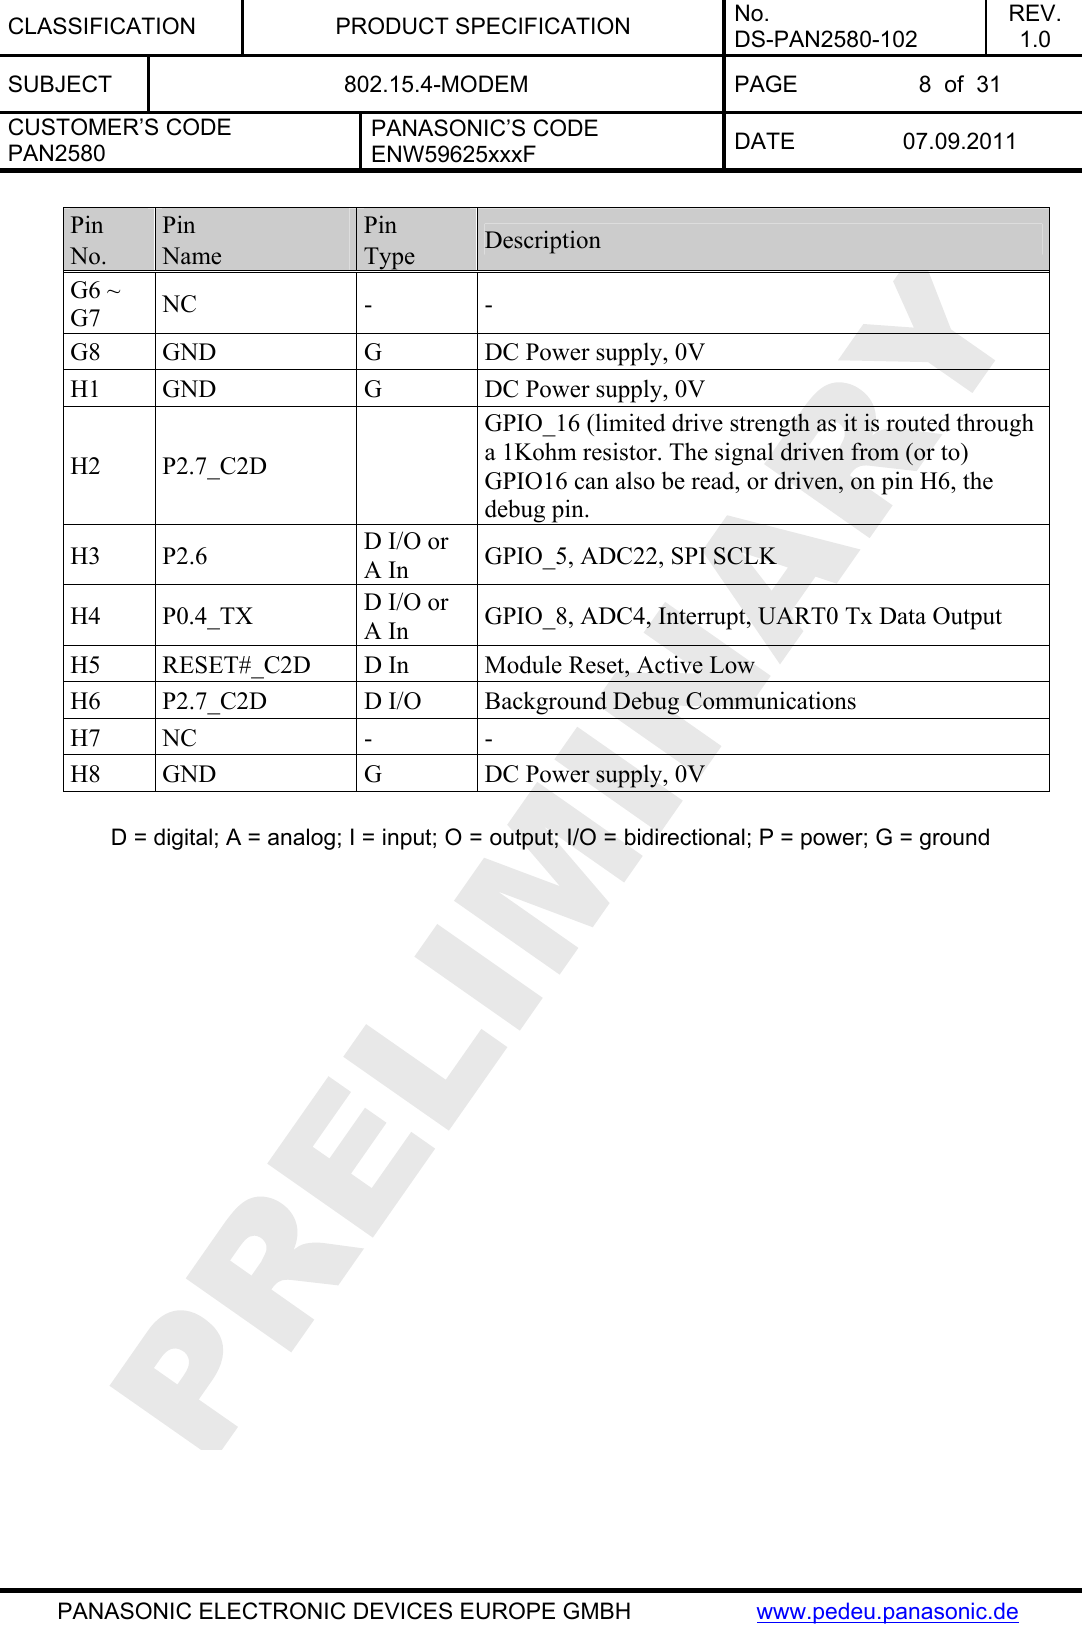 CLASSIFICATION PRODUCT SPECIFICATION No. DS-PAN2580-102 REV. 1.0 SUBJECT  802.15.4-MODEM  PAGE  8  of  31 CUSTOMER’S CODE PAN2580 PANASONIC’S CODE ENW59625xxxF  DATE 07.09.2011   PANASONIC ELECTRONIC DEVICES EUROPE GMBH  www.pedeu.panasonic.de  Pin No. Pin Name Pin Type  Description G6 ~ G7  NC - - G8  GND  G  DC Power supply, 0V H1  GND  G  DC Power supply, 0V H2 P2.7_C2D   GPIO_16 (limited drive strength as it is routed through a 1Kohm resistor. The signal driven from (or to) GPIO16 can also be read, or driven, on pin H6, the debug pin. H3 P2.6  D I/O or A In  GPIO_5, ADC22, SPI SCLK H4 P0.4_TX  D I/O or A In  GPIO_8, ADC4, Interrupt, UART0 Tx Data Output H5  RESET#_C2D  D In  Module Reset, Active Low H6  P2.7_C2D  D I/O  Background Debug Communications H7 NC  -  - H8  GND  G  DC Power supply, 0V  D = digital; A = analog; I = input; O = output; I/O = bidirectional; P = power; G = ground  